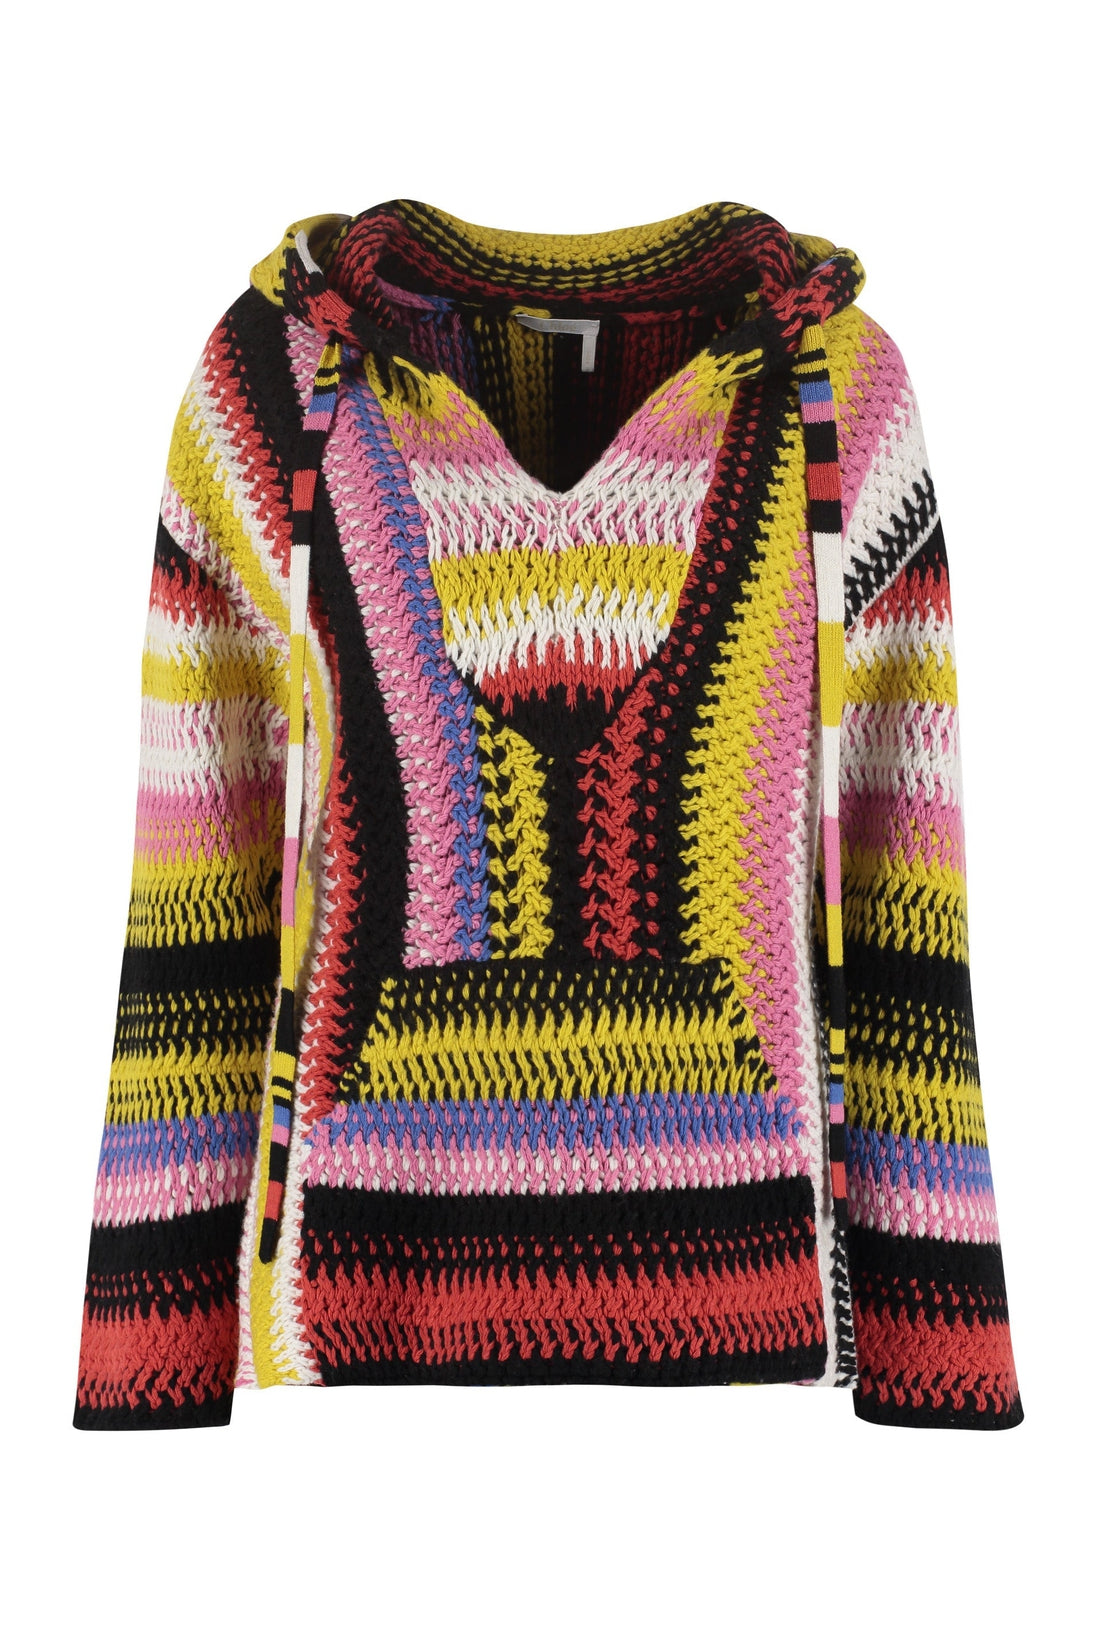 Chloé-OUTLET-SALE-Knitted hoodie-ARCHIVIST